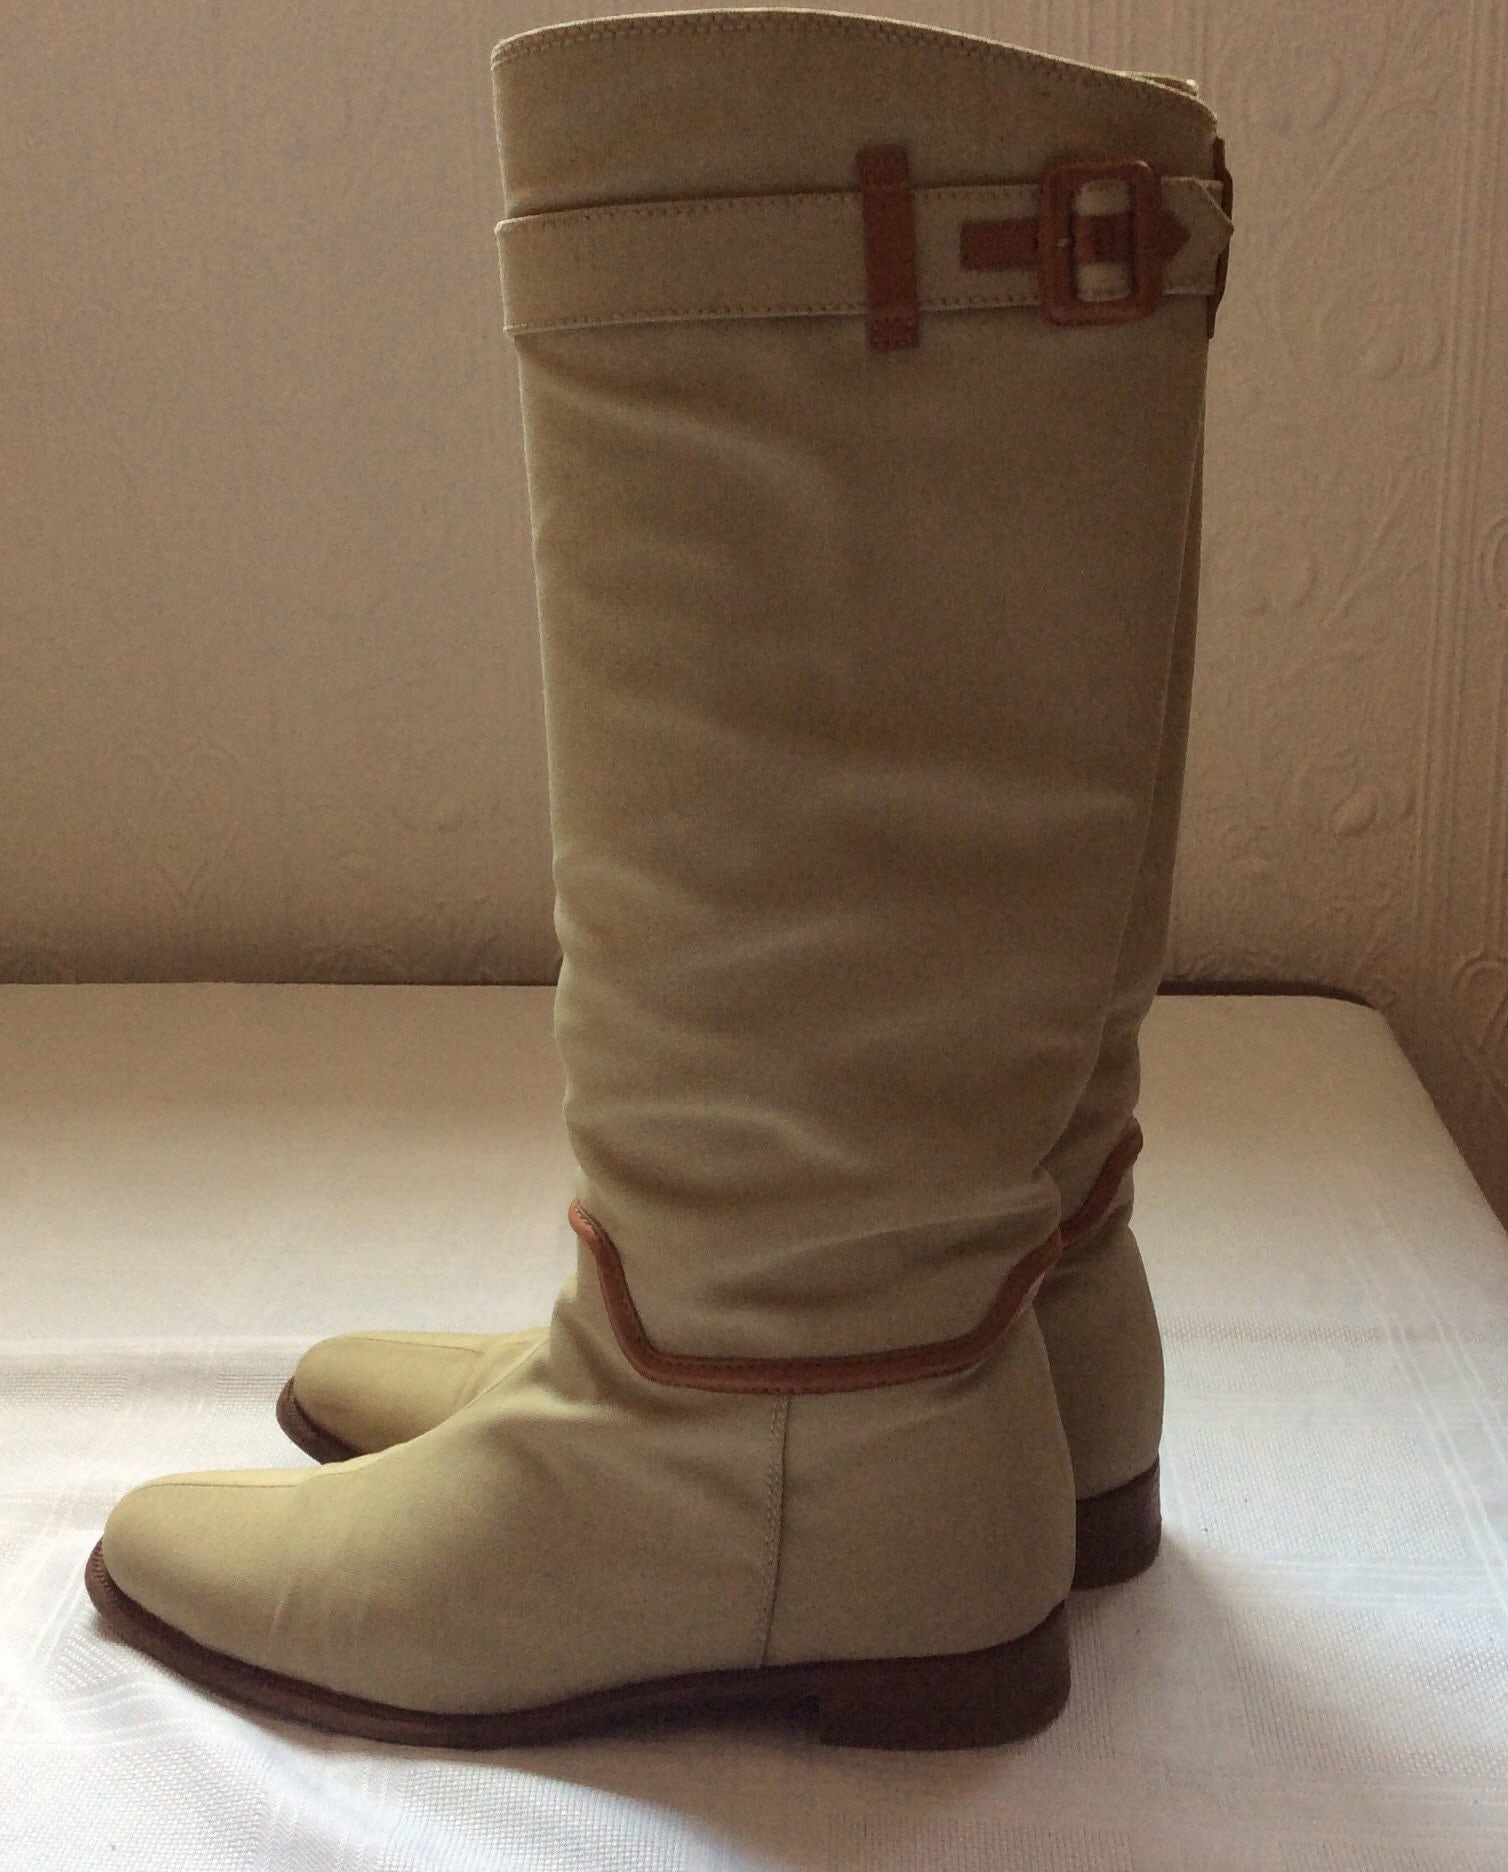 Early 2000 Burberry Riding Boots Worn Once or Twice Size  - Etsy